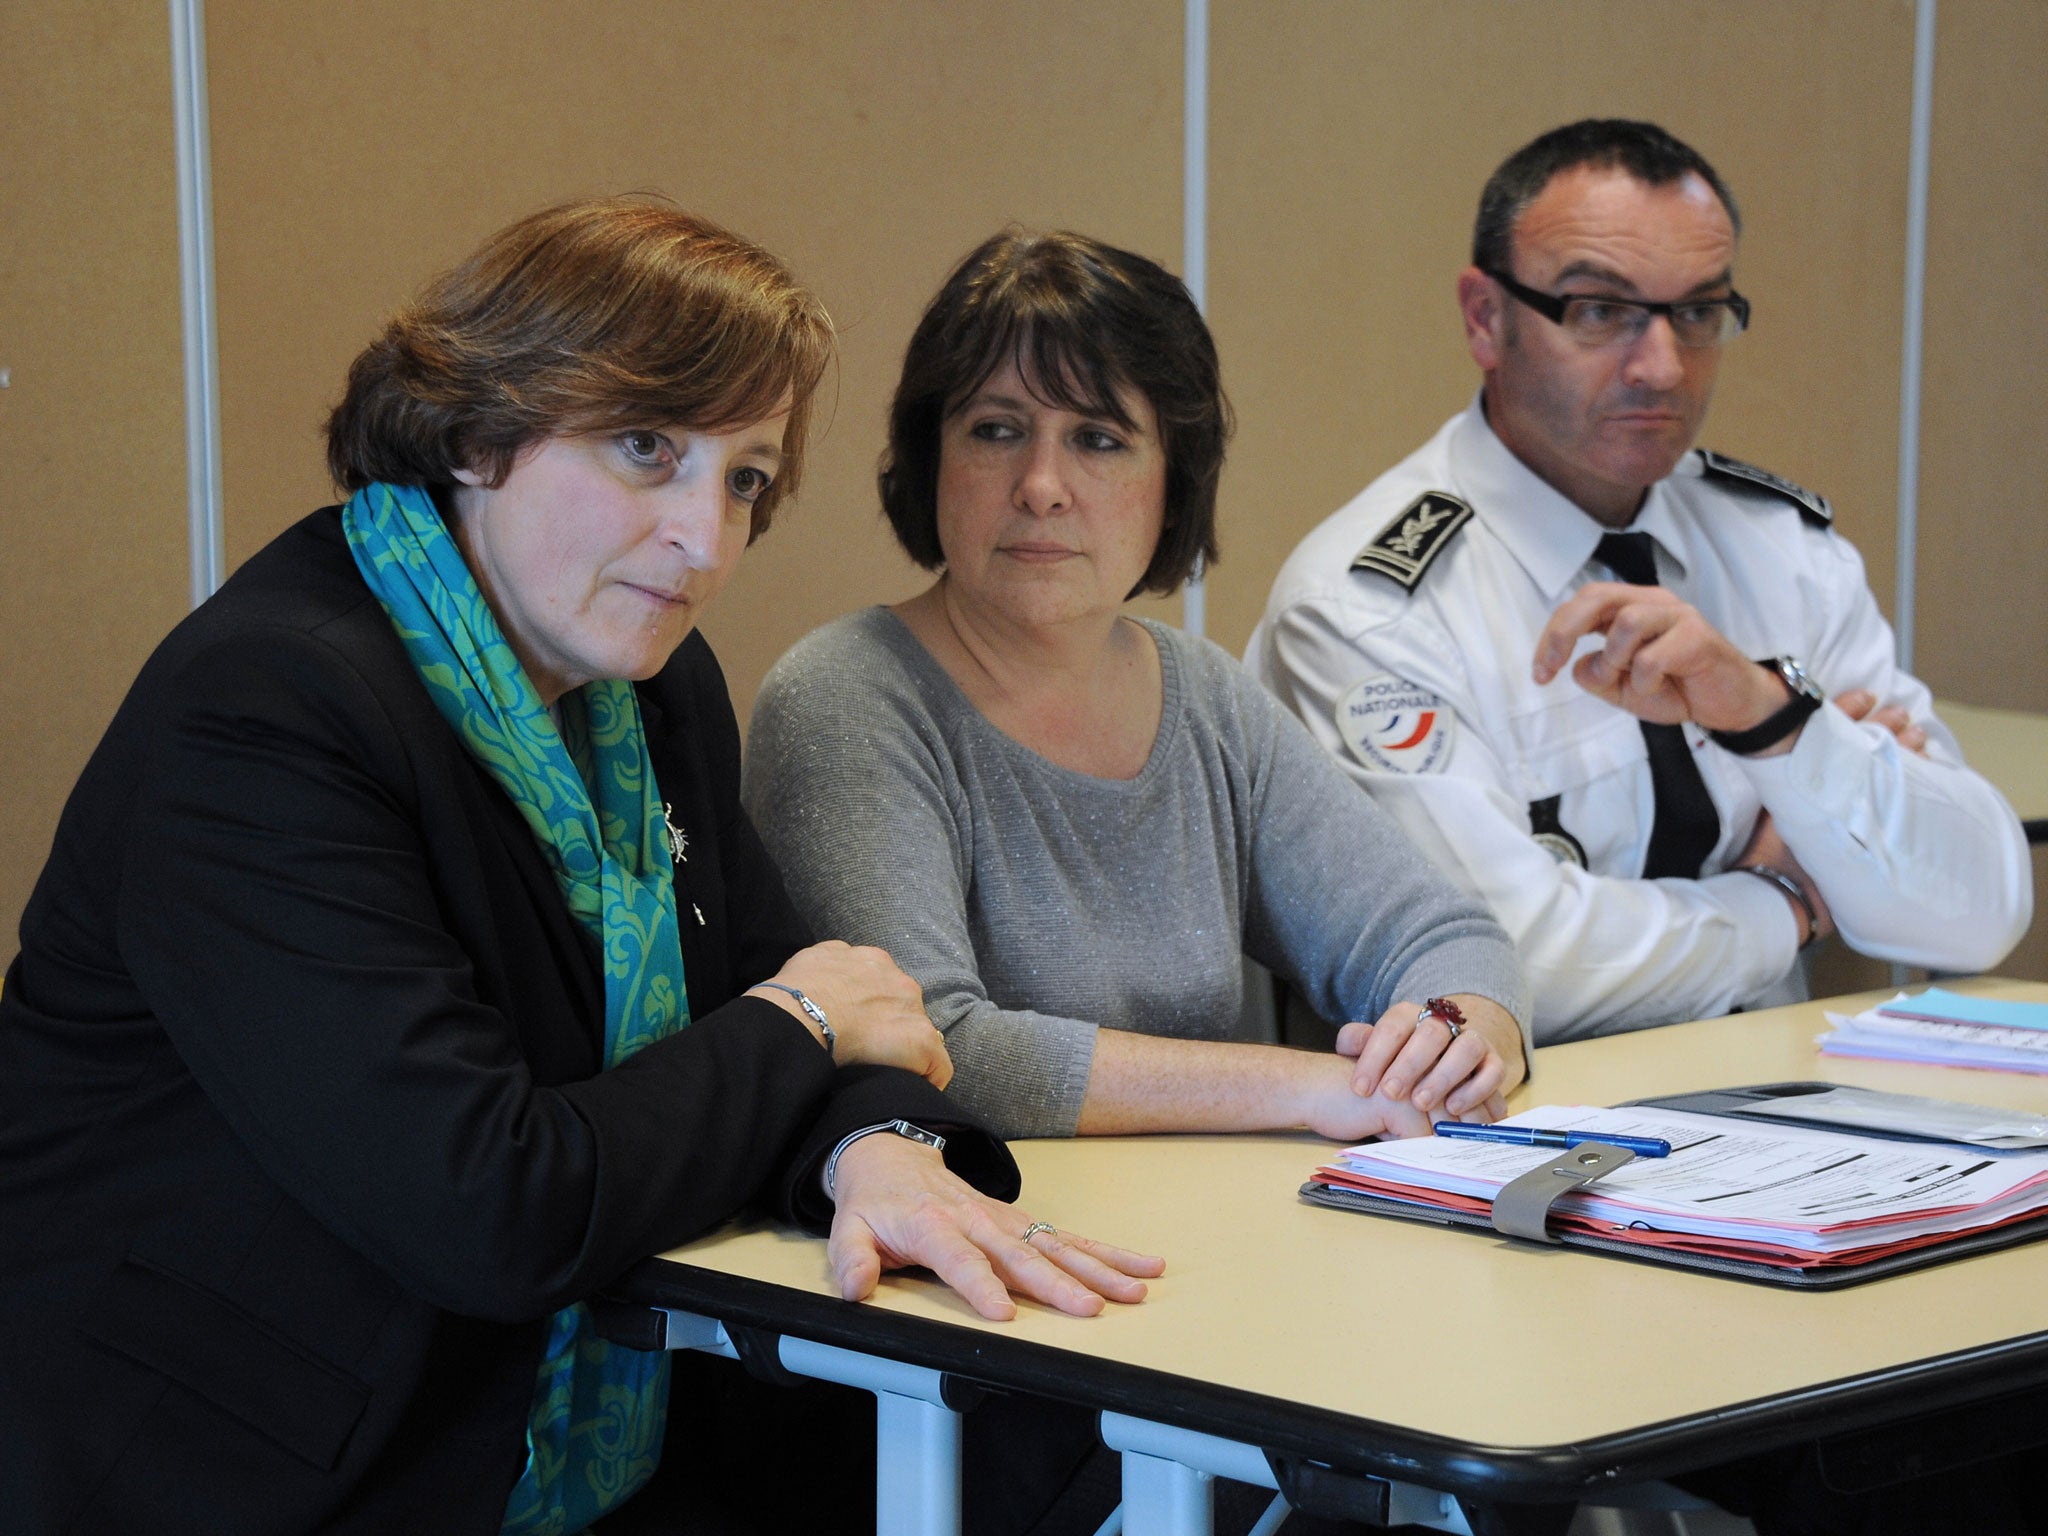 Headteacher Chantal Devaux (L), prosecutor Isabelle Pagenelle (C) and departmental director of public safety Olivier Le Guestre (R) organise a meeting with parents and the press